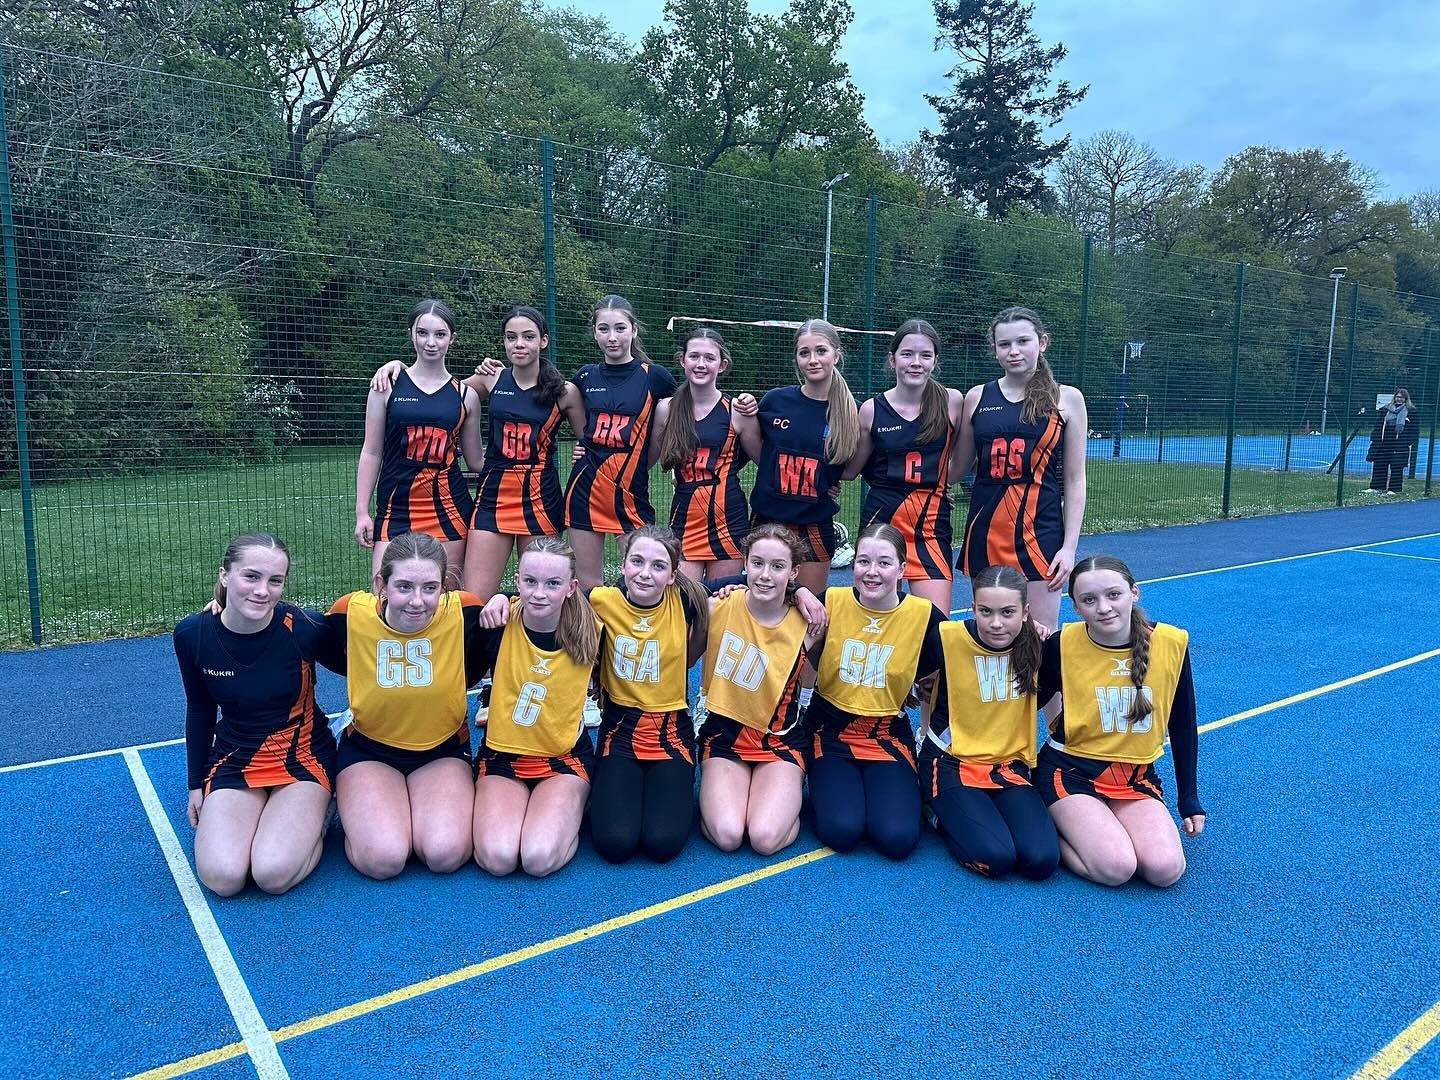 Last Garden City game for Hornets Navy (y9) and Hornets Orange (y8) tonight at their home ground! A great game to watch - both teams fighting for the win! With the Hornets Orange team just pipping the Navys to the win by 33-27! A well contested game!